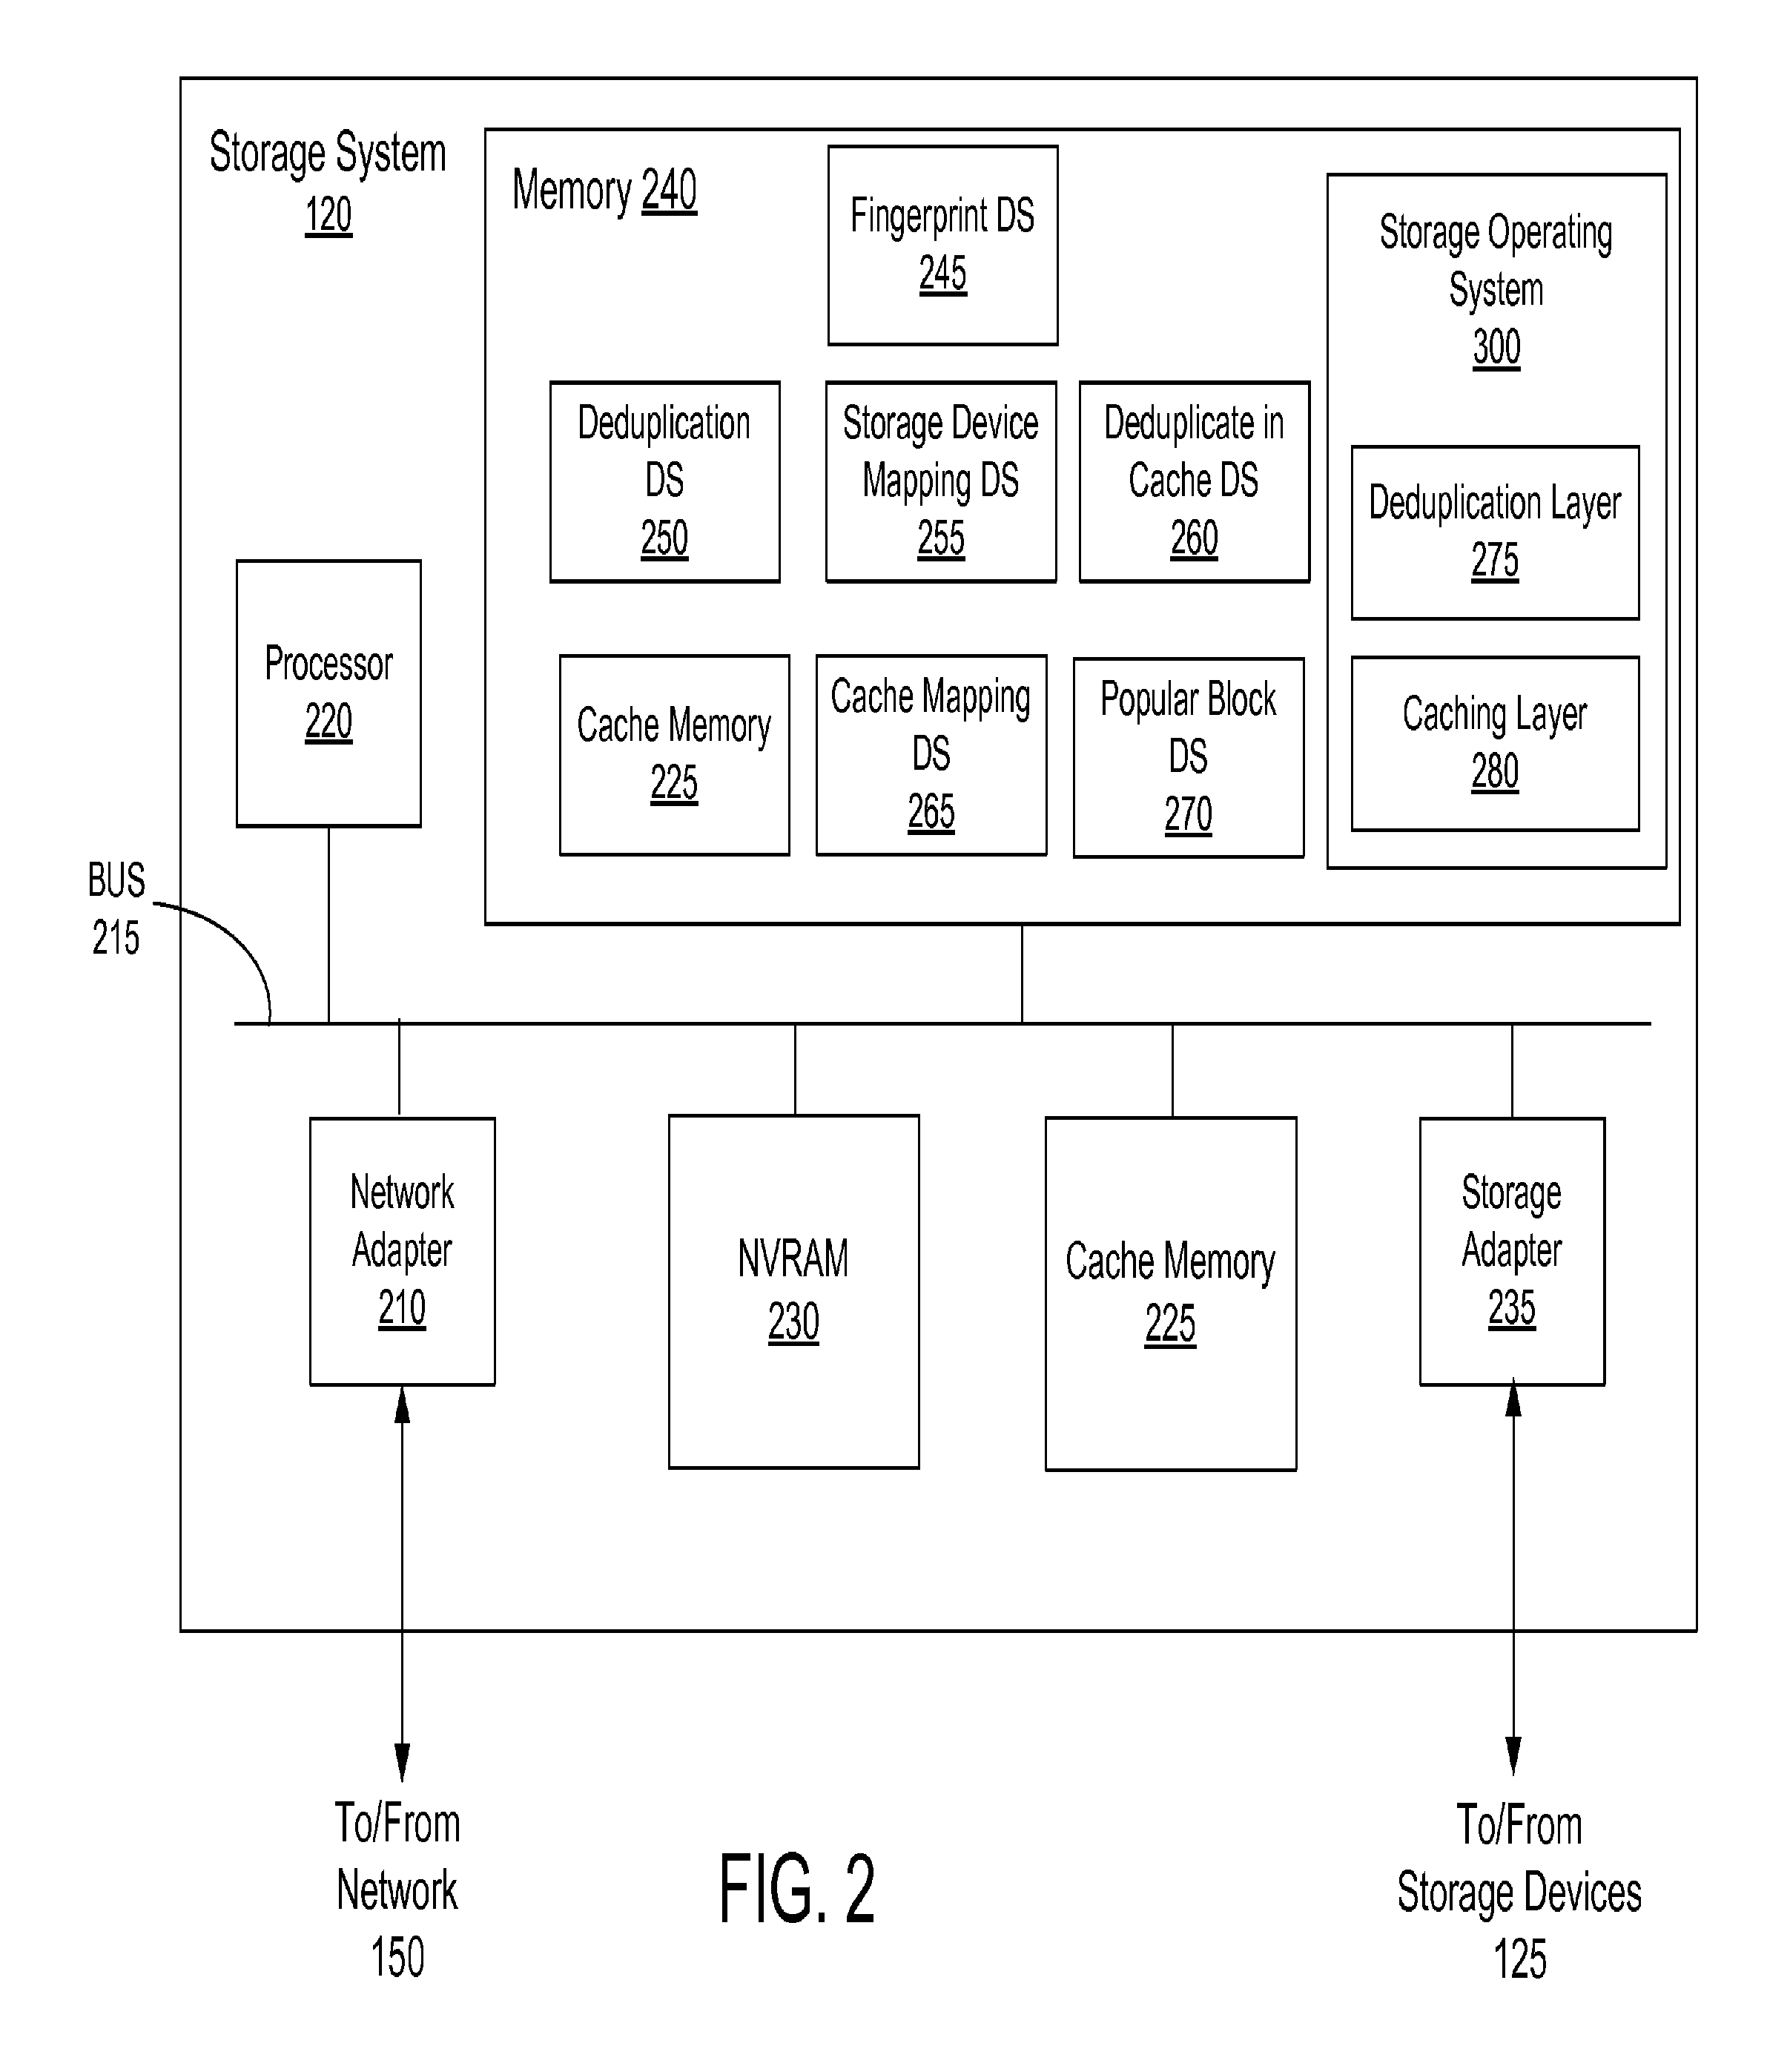 Caching and deduplication of data blocks in cache memory